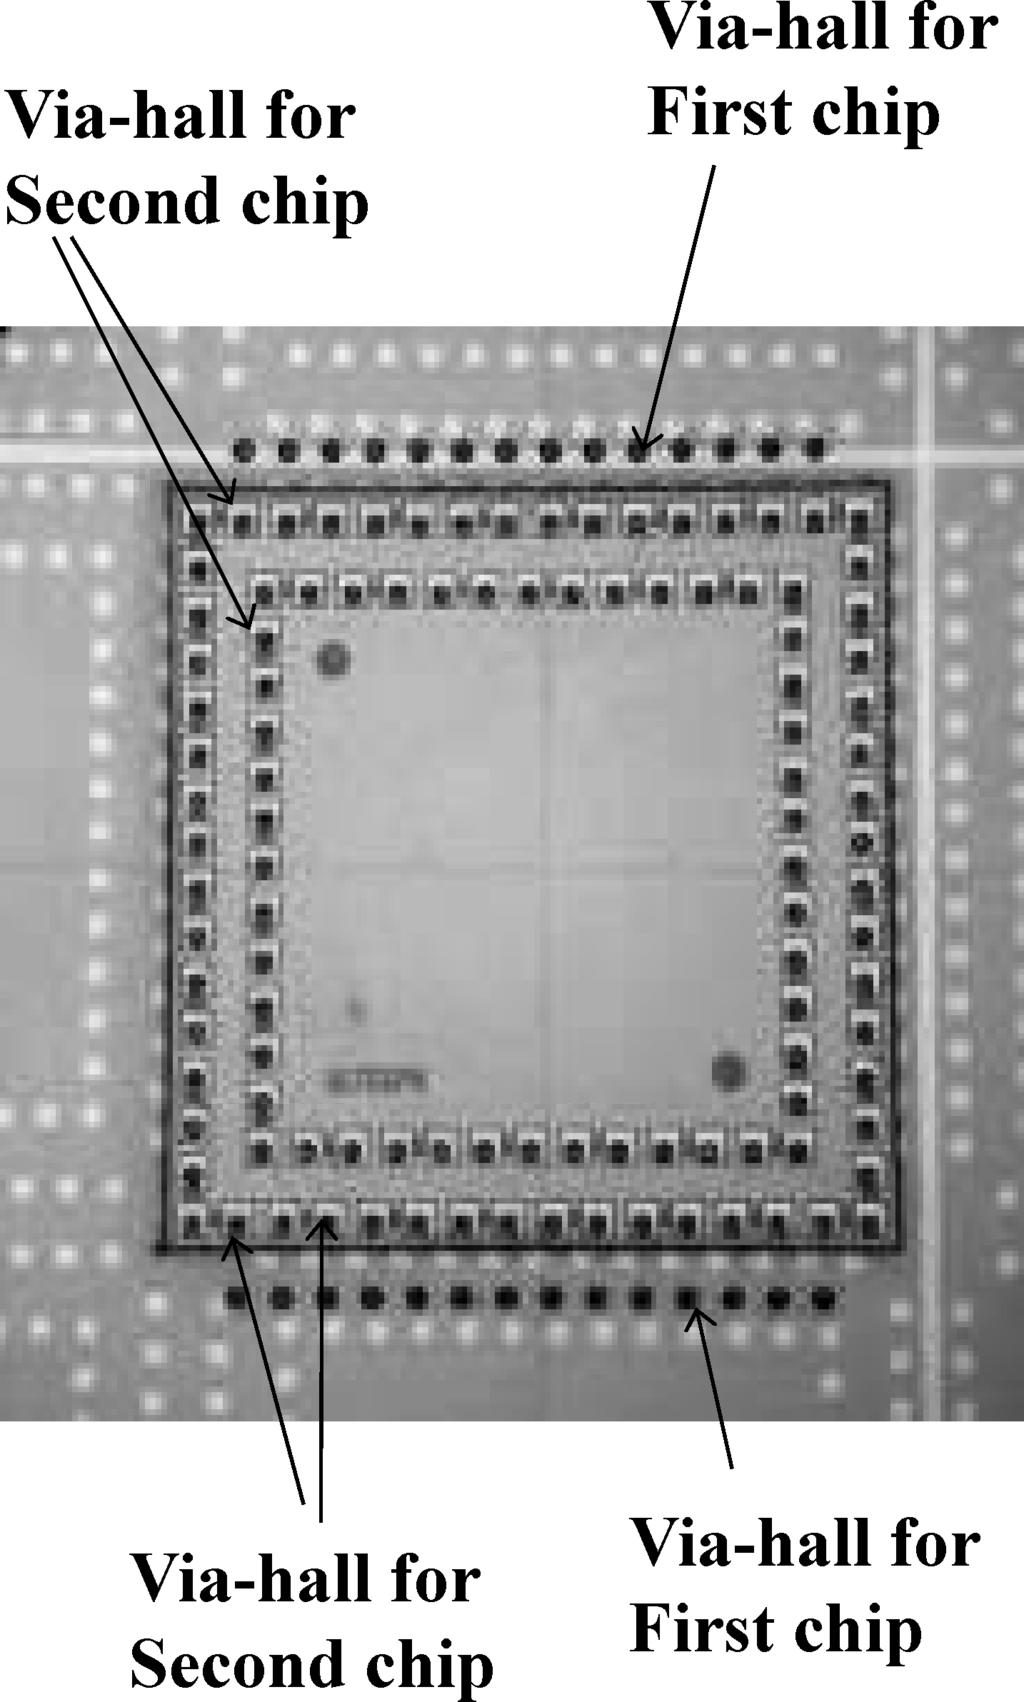 Ltd.). 3. Results and Discussion 3.1 Mounting the second chips on the first chips Figure 3 shows photographs of the mounted, second, chips on the first chips, or wafer.